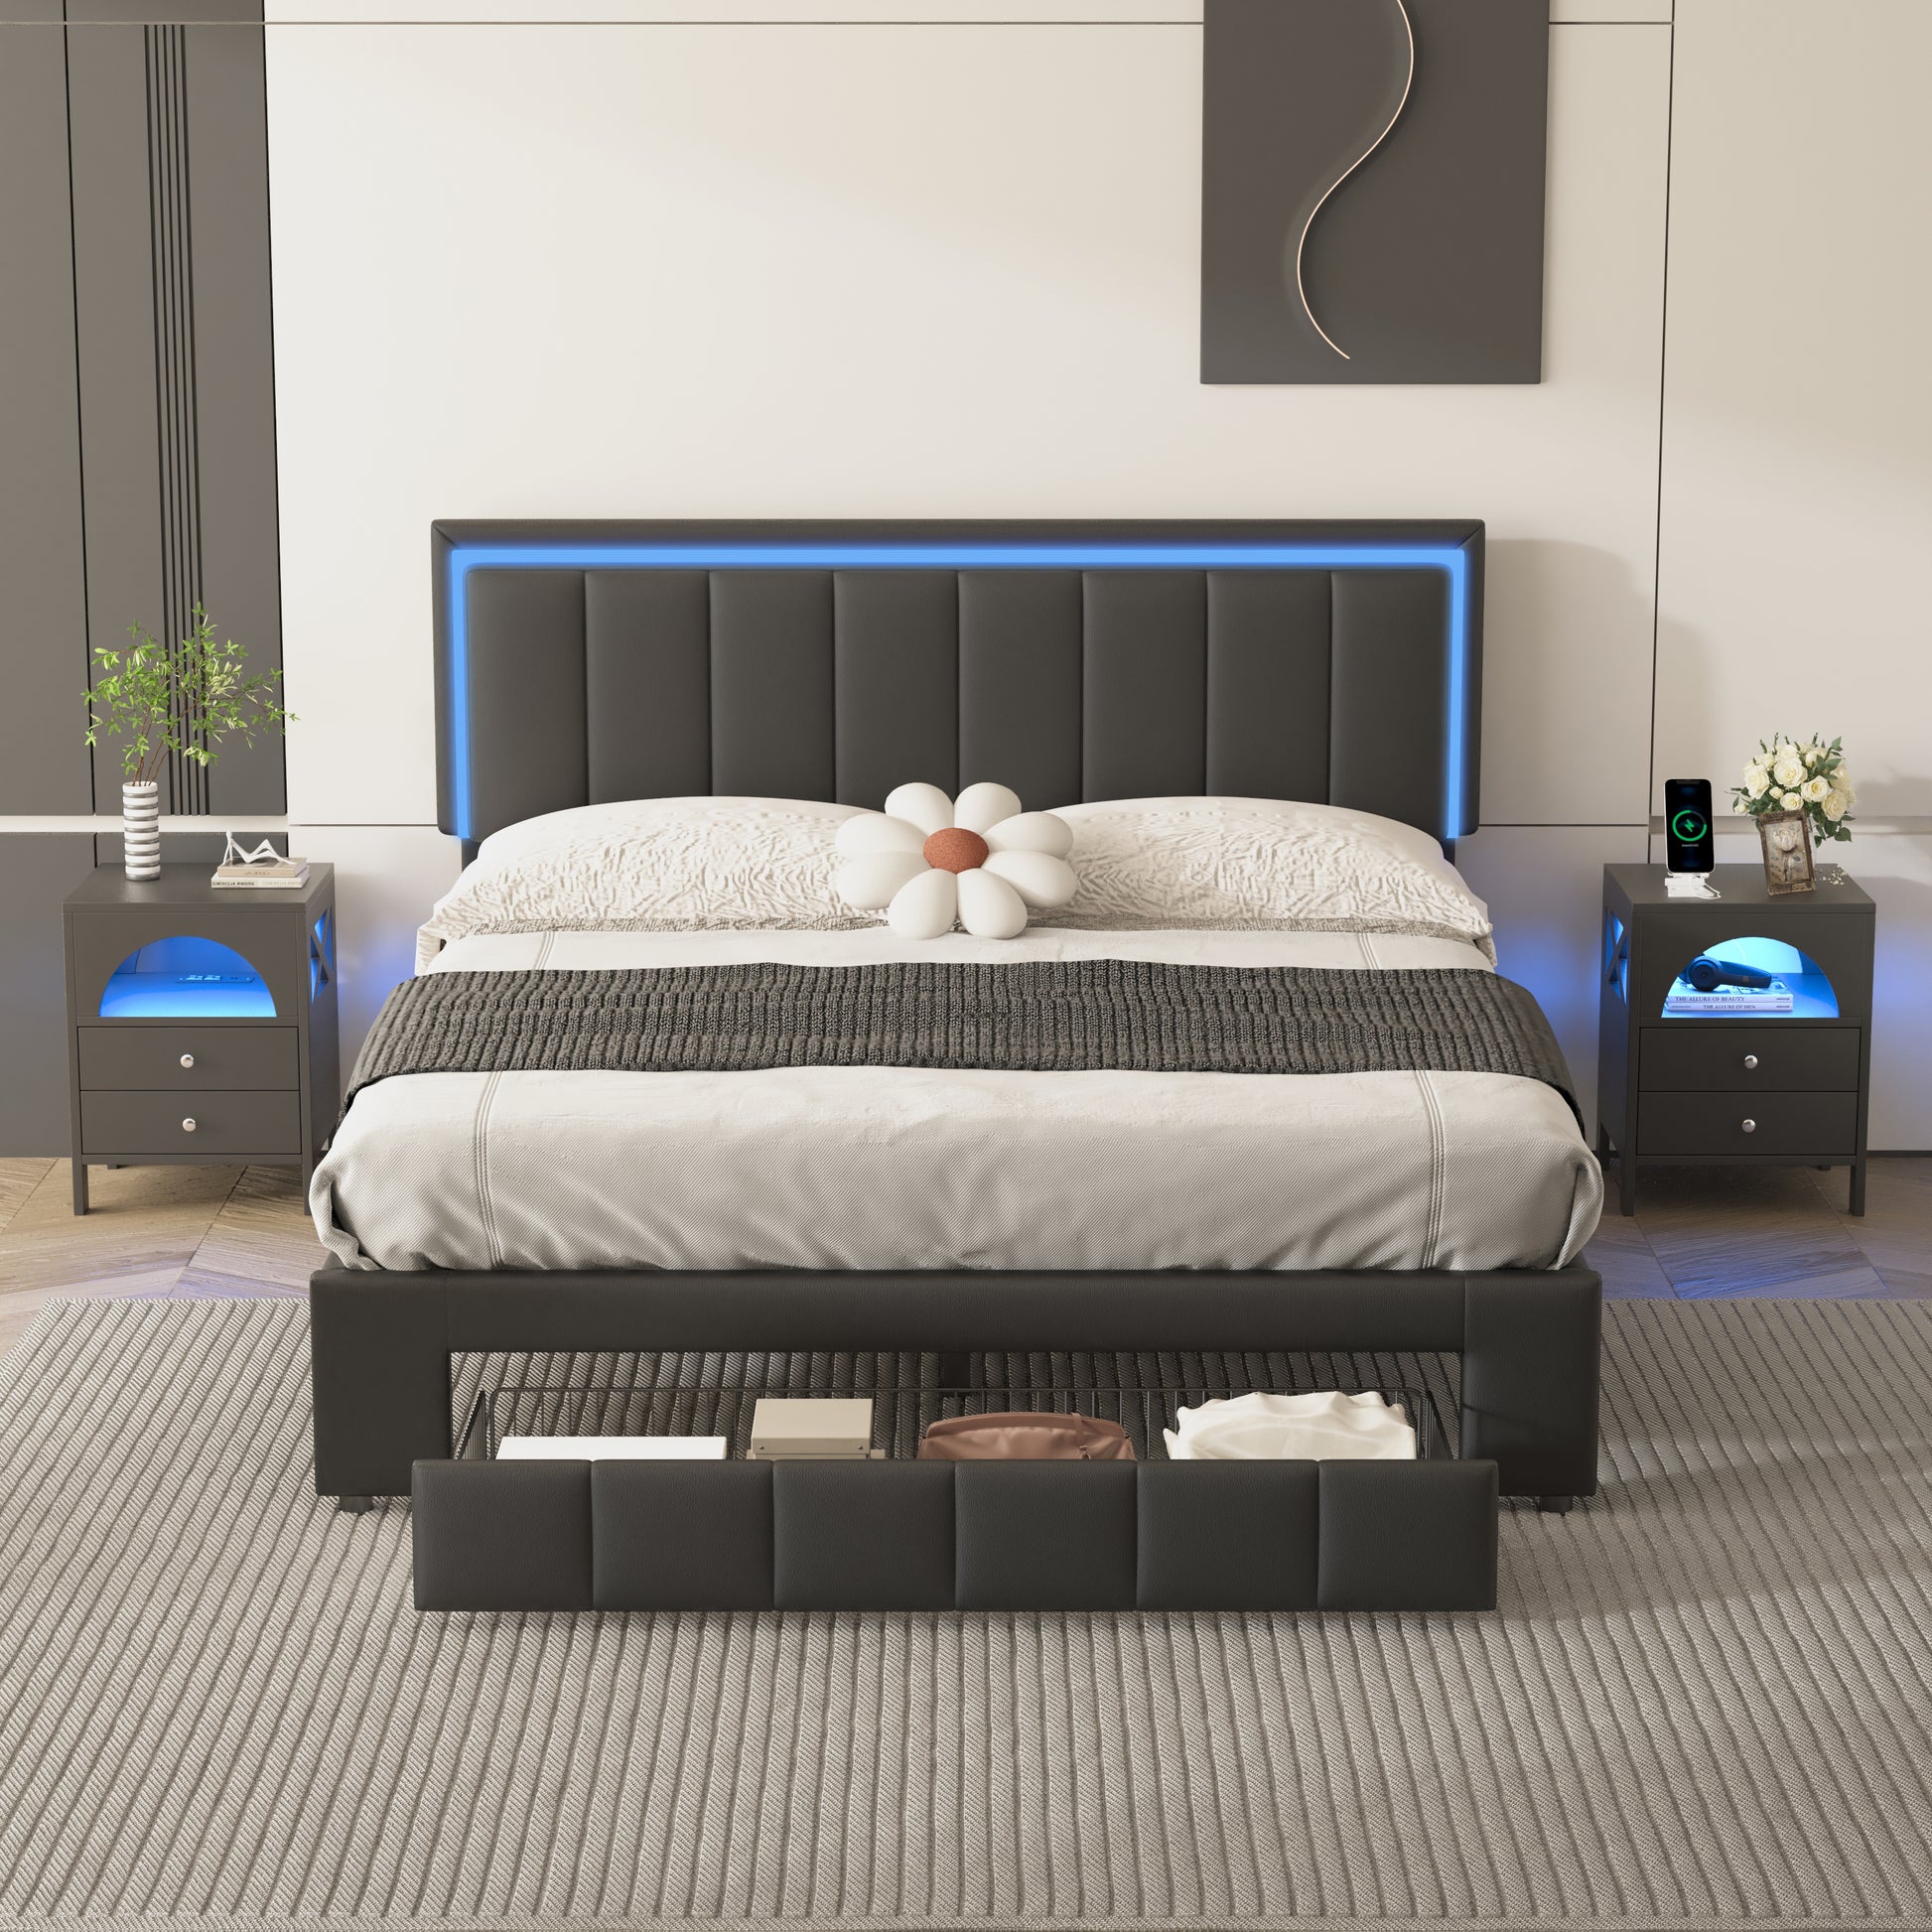 3-Pieces Bedroom Sets,Queen Size Upholstered Bed with LED Lights and Motion Activated Night Lights,Two Nightstands with USB Charging Station and LED lights,Black - Enova Luxe Home Store